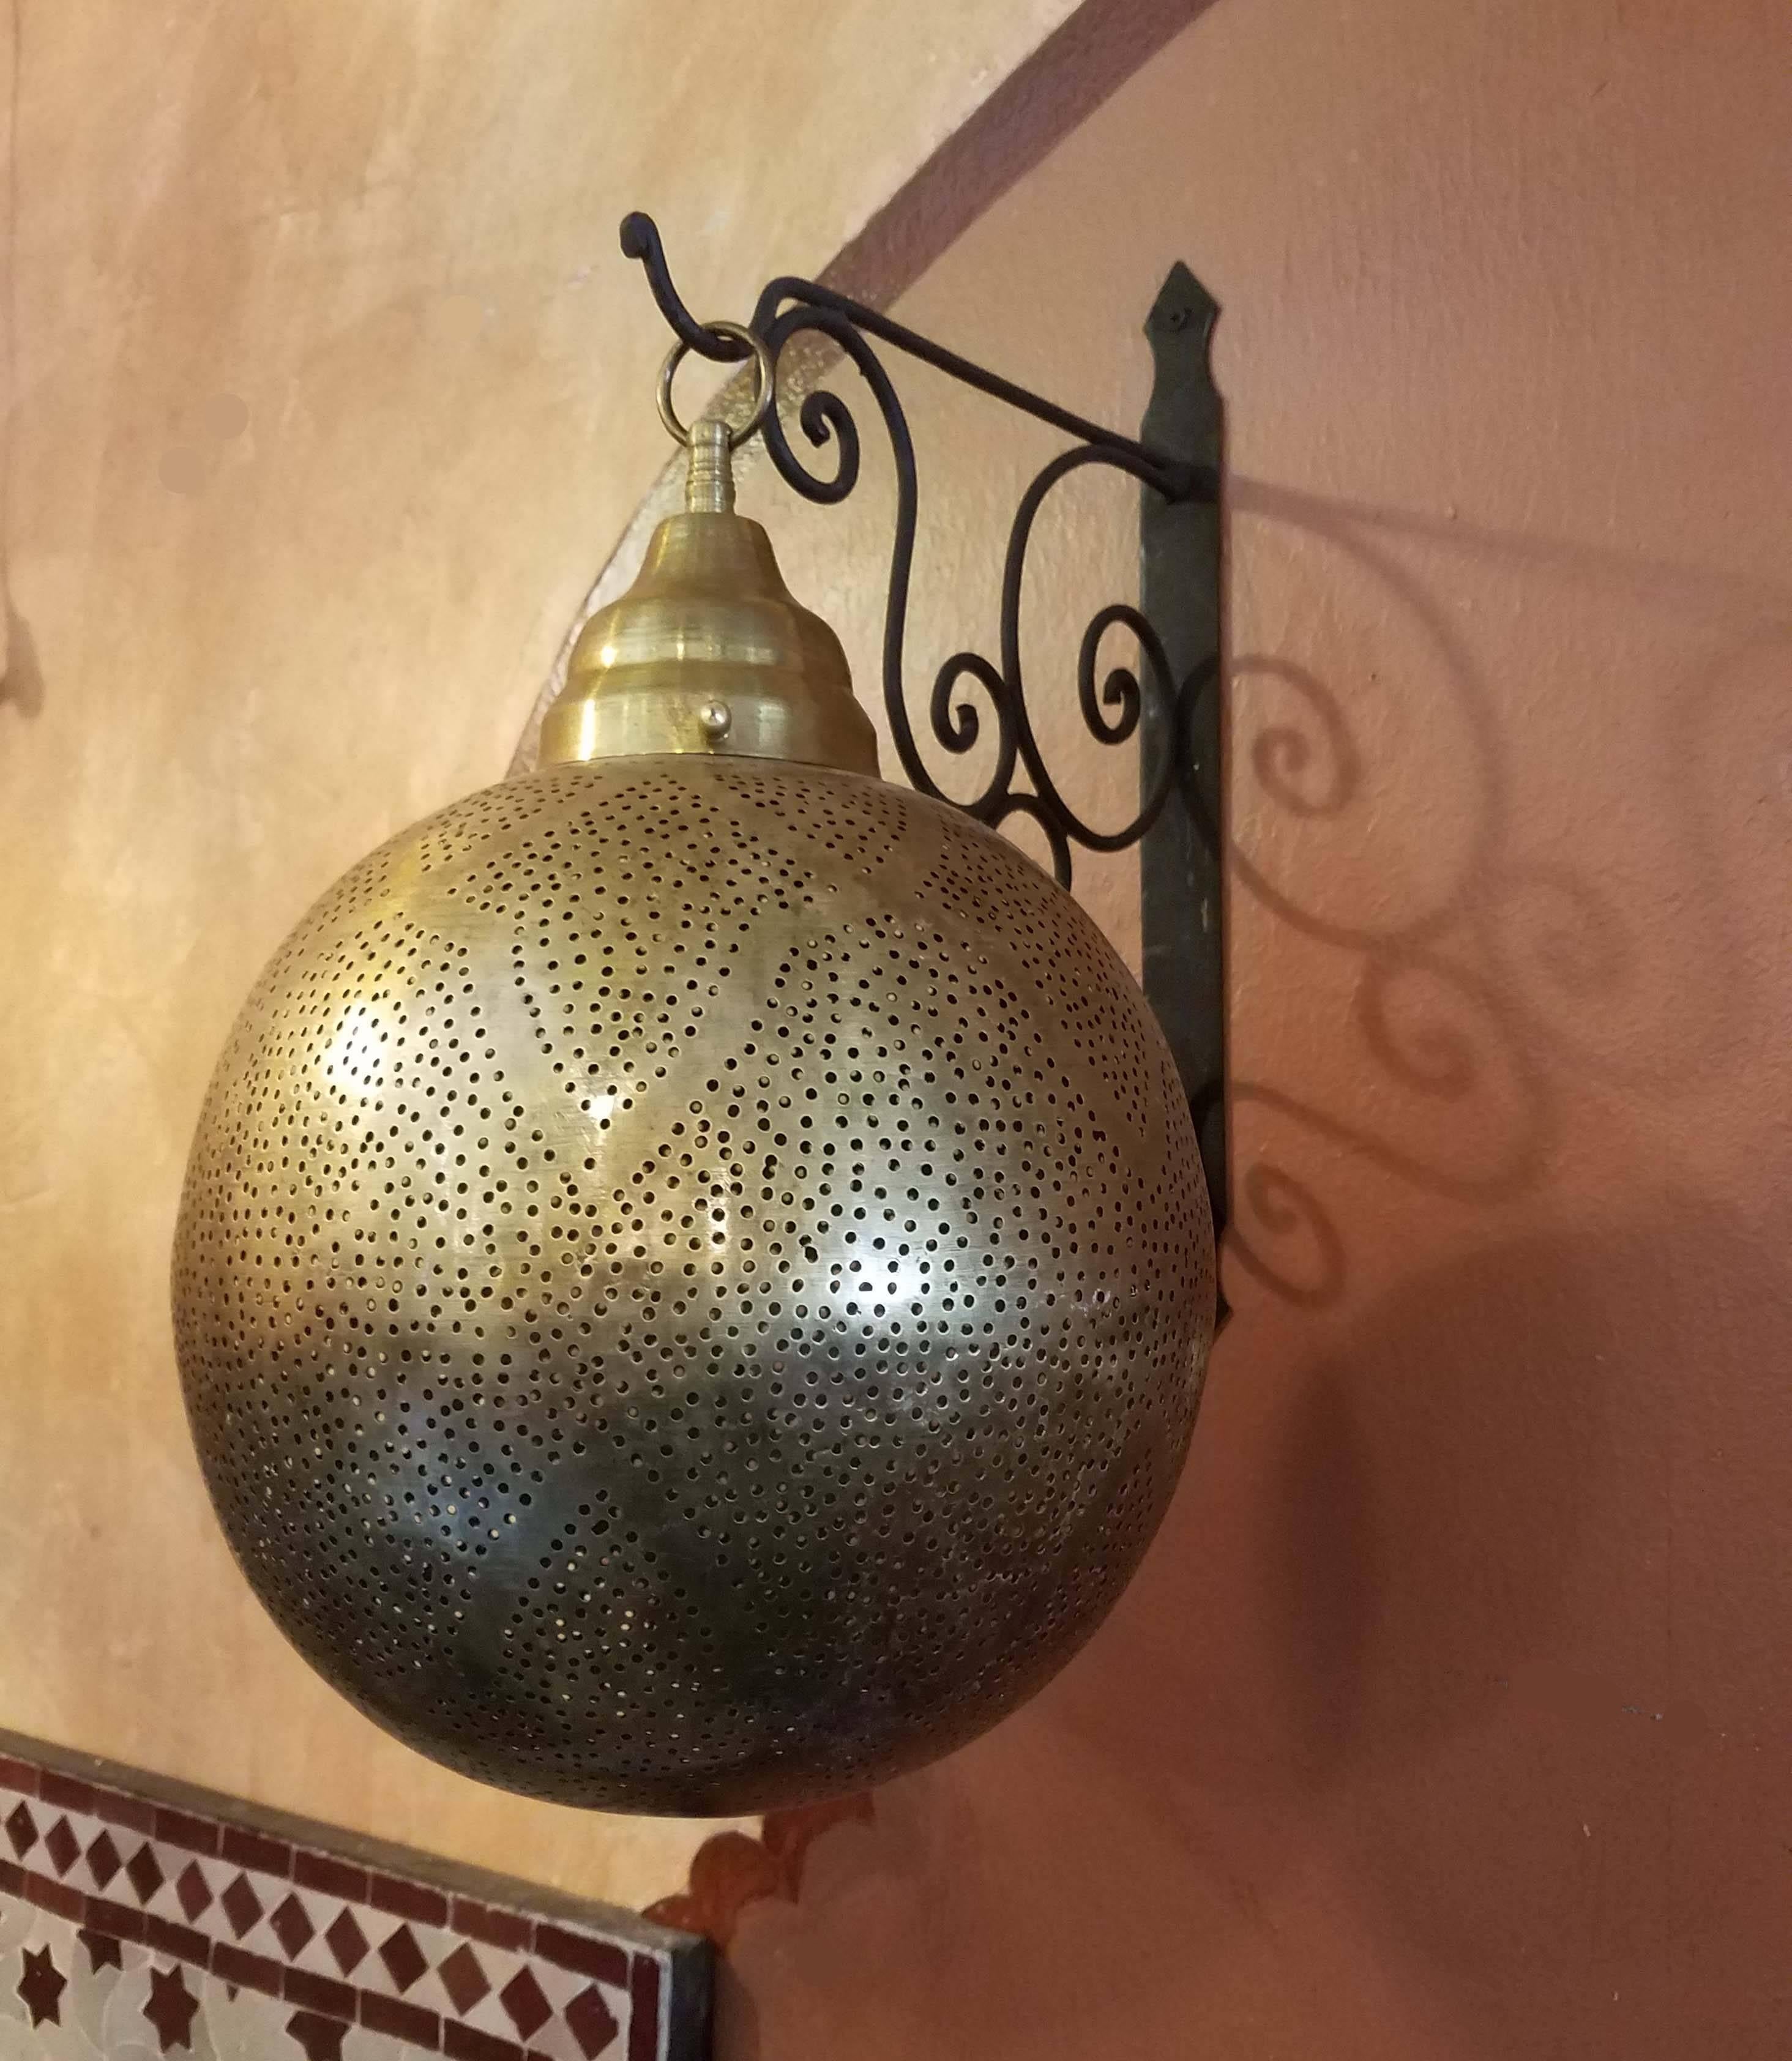 Made from pure copper, these beautiful Moroccan table lamps or lanterns are sure to be show-stoppers anywhere in your home. Each is handmade using ancient artisan methods which consist of puncturing the surface with a unique, elaborate design, so